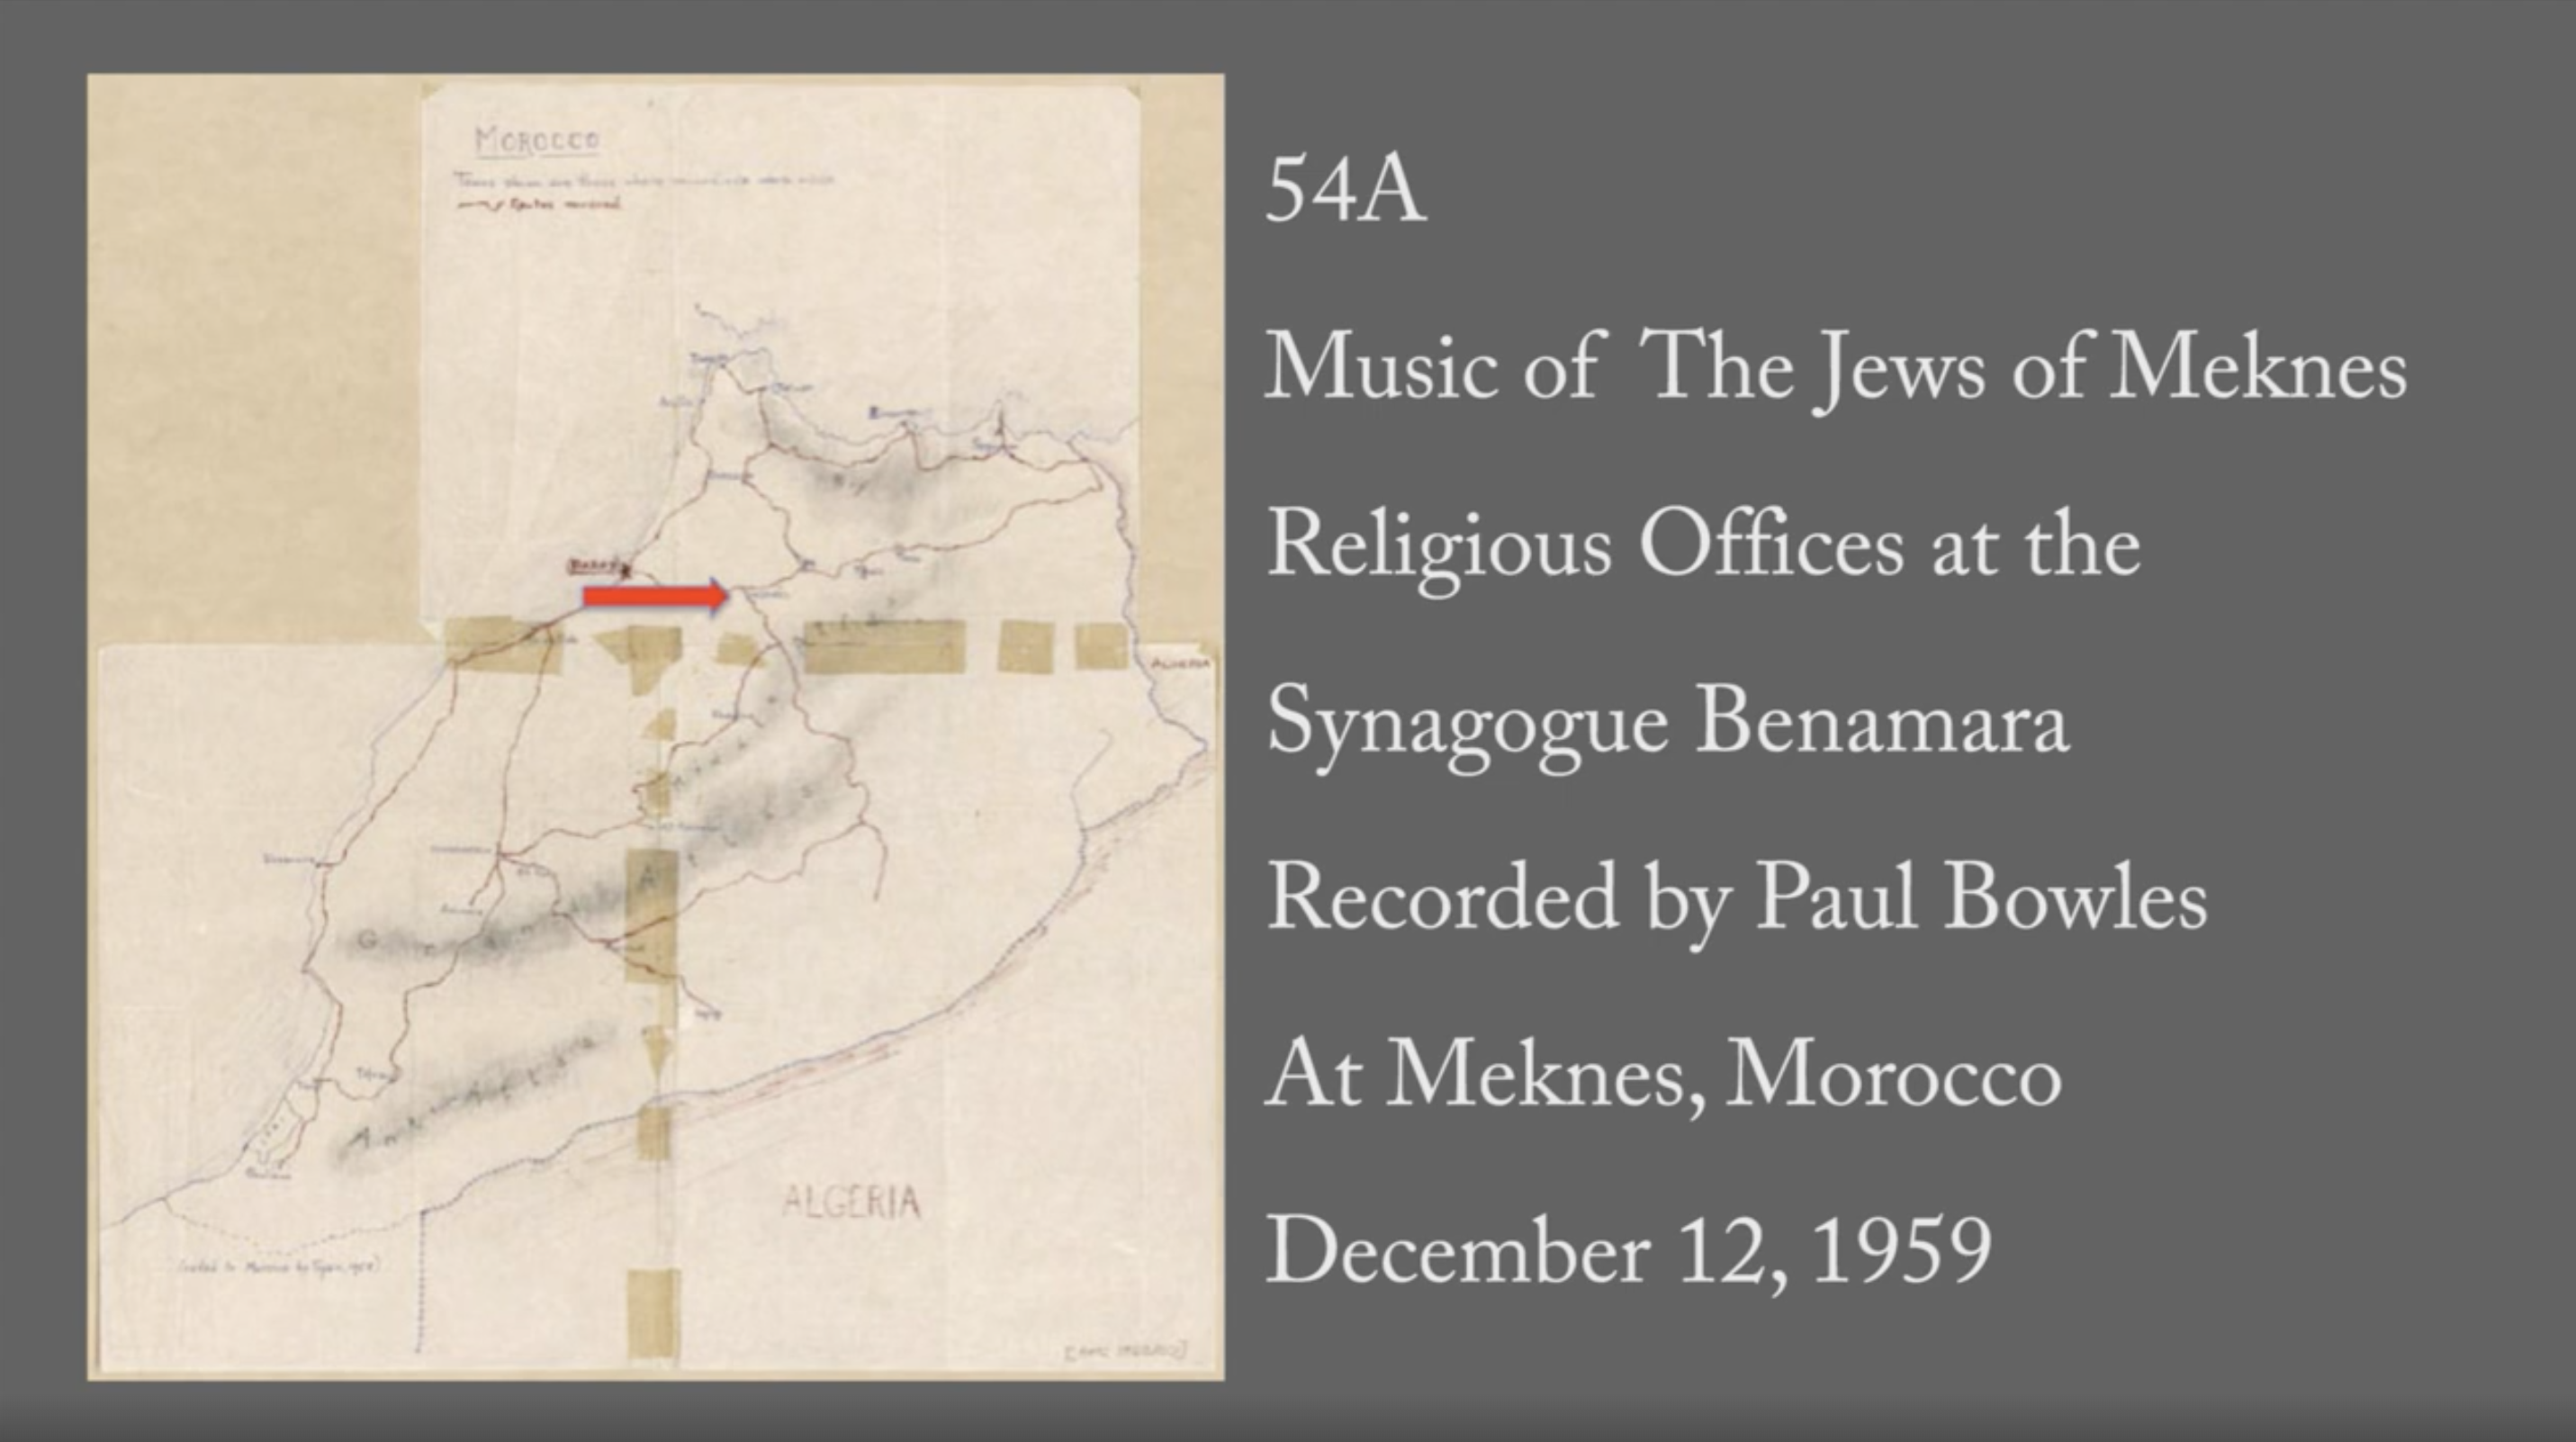 54A: "Music of The Jews of Meknes"